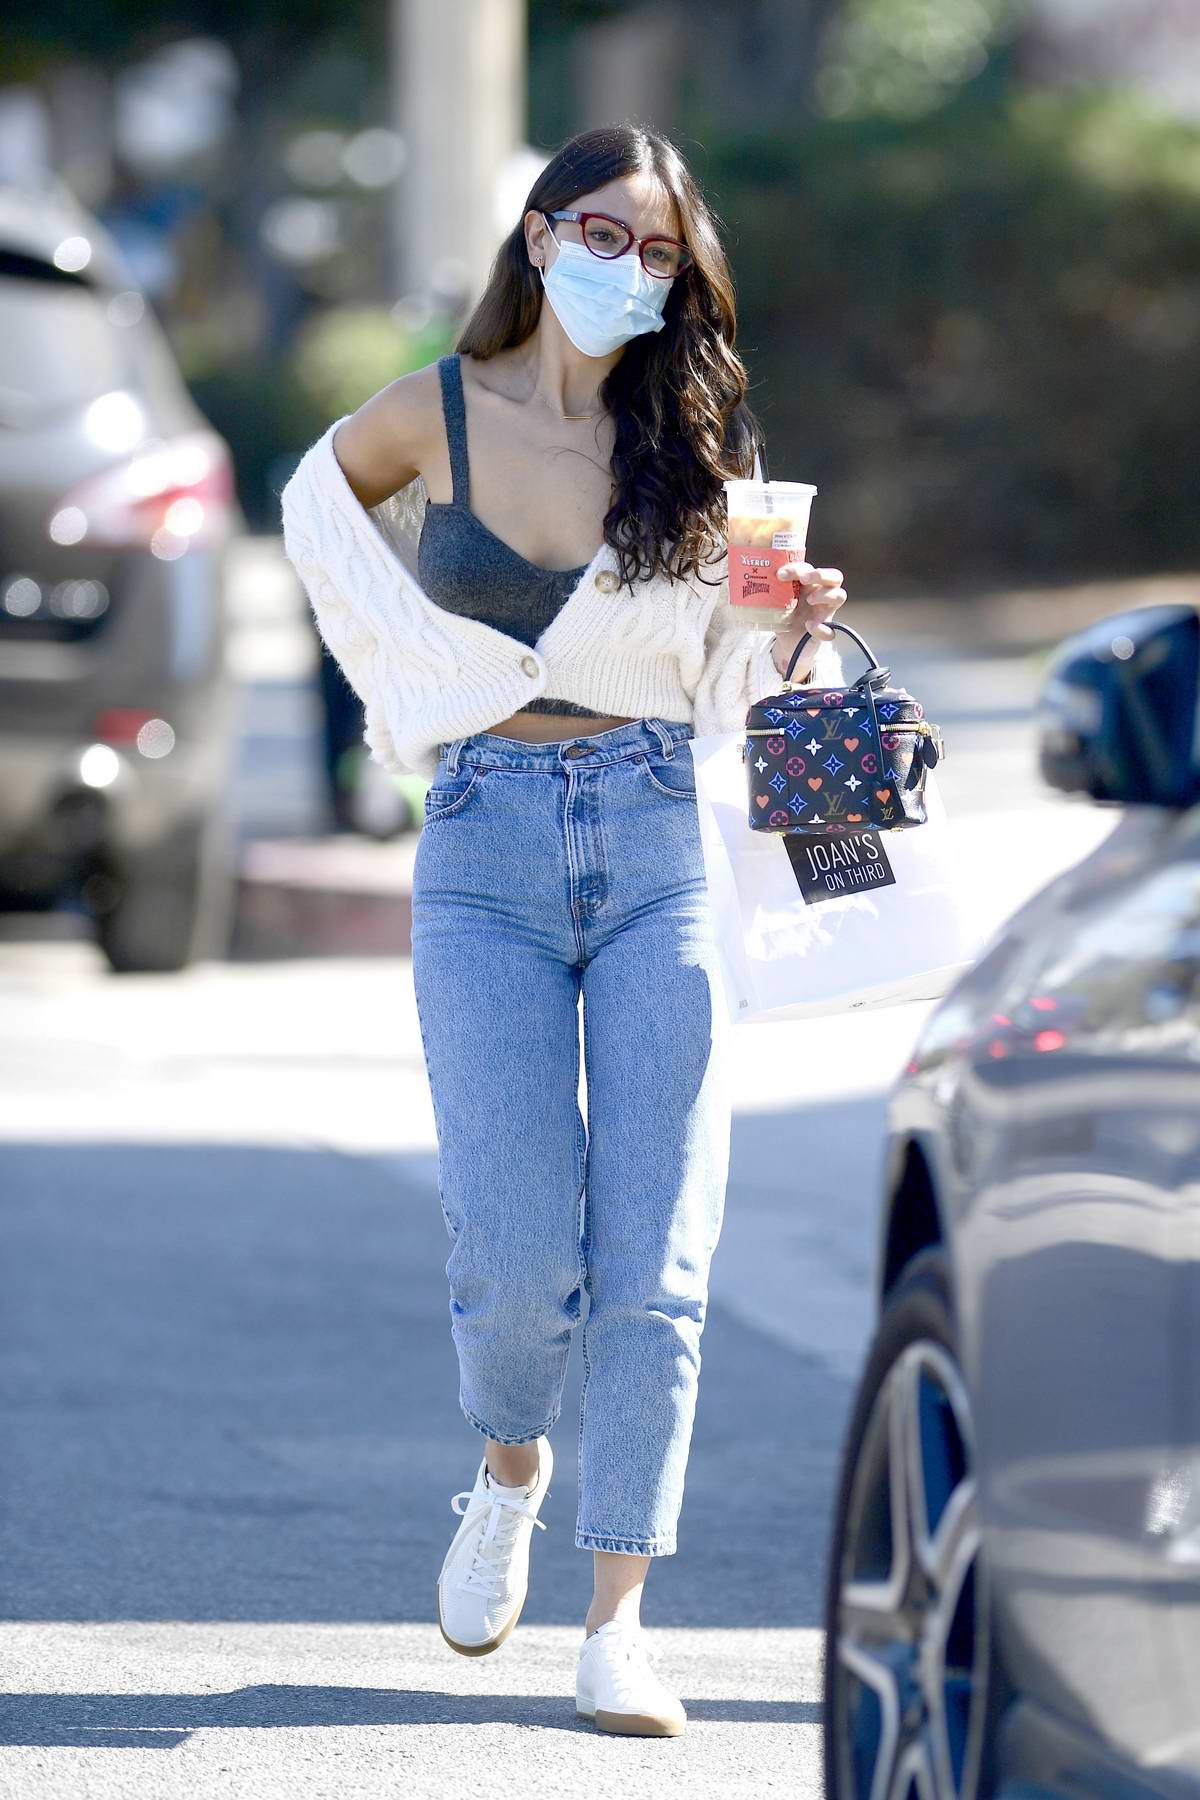 eiza gonzalez looks cute in a black crop top, jeans and sneakers